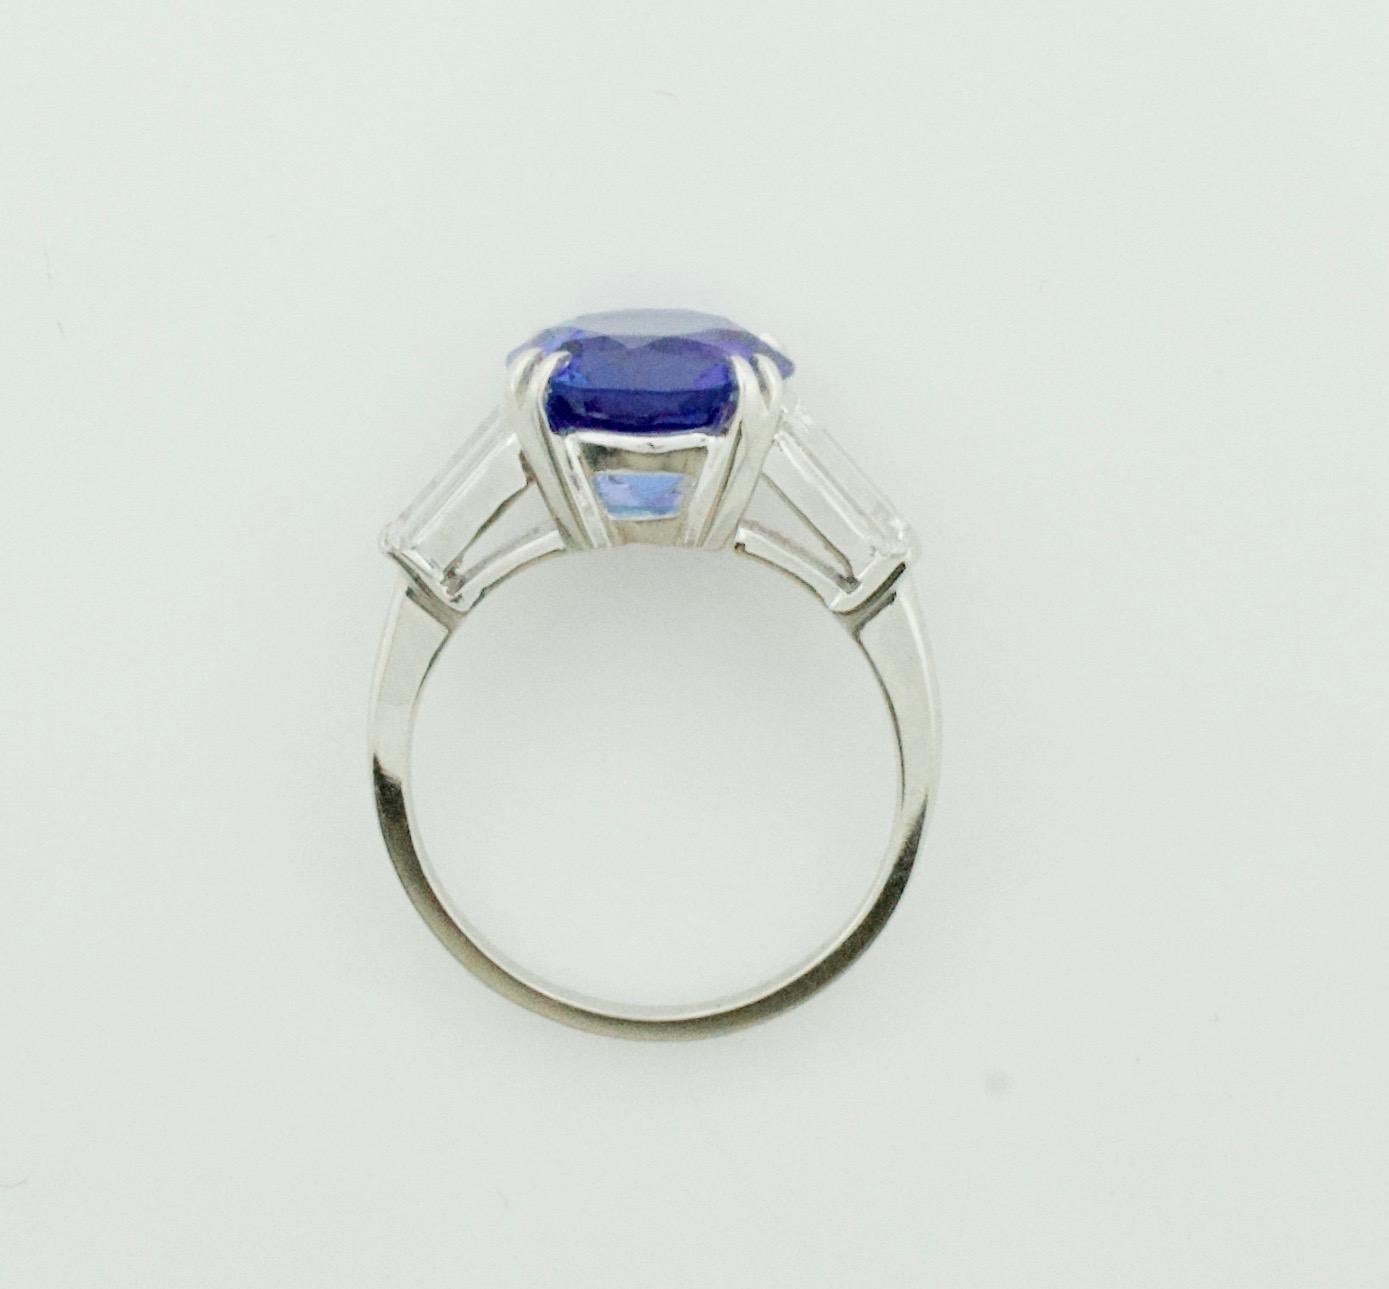 Introducing the stunning Estate Platinum Tanzanite and Diamond Ring, featuring a mesmerizing 3.51 carat round brilliant cut Tanzanite. This exquisite gemstone boasts extreme brilliance and is completely free of any visible imperfections to the naked